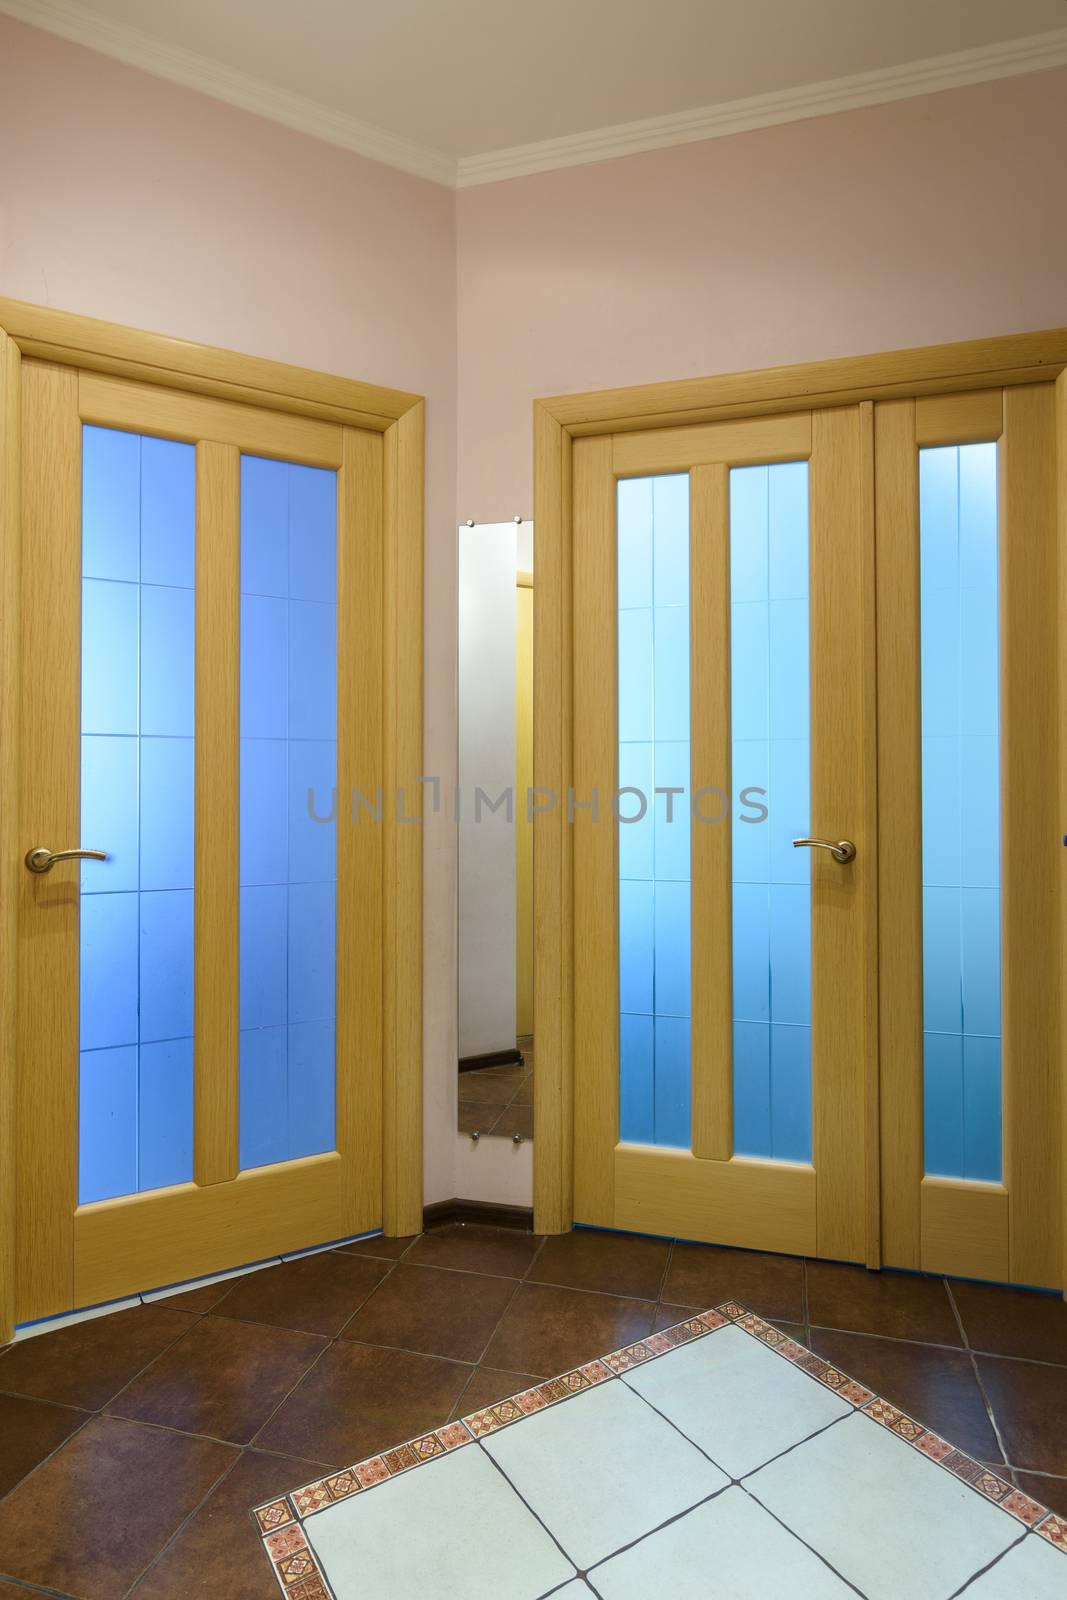 Closed glass interior doors, view from the corridor